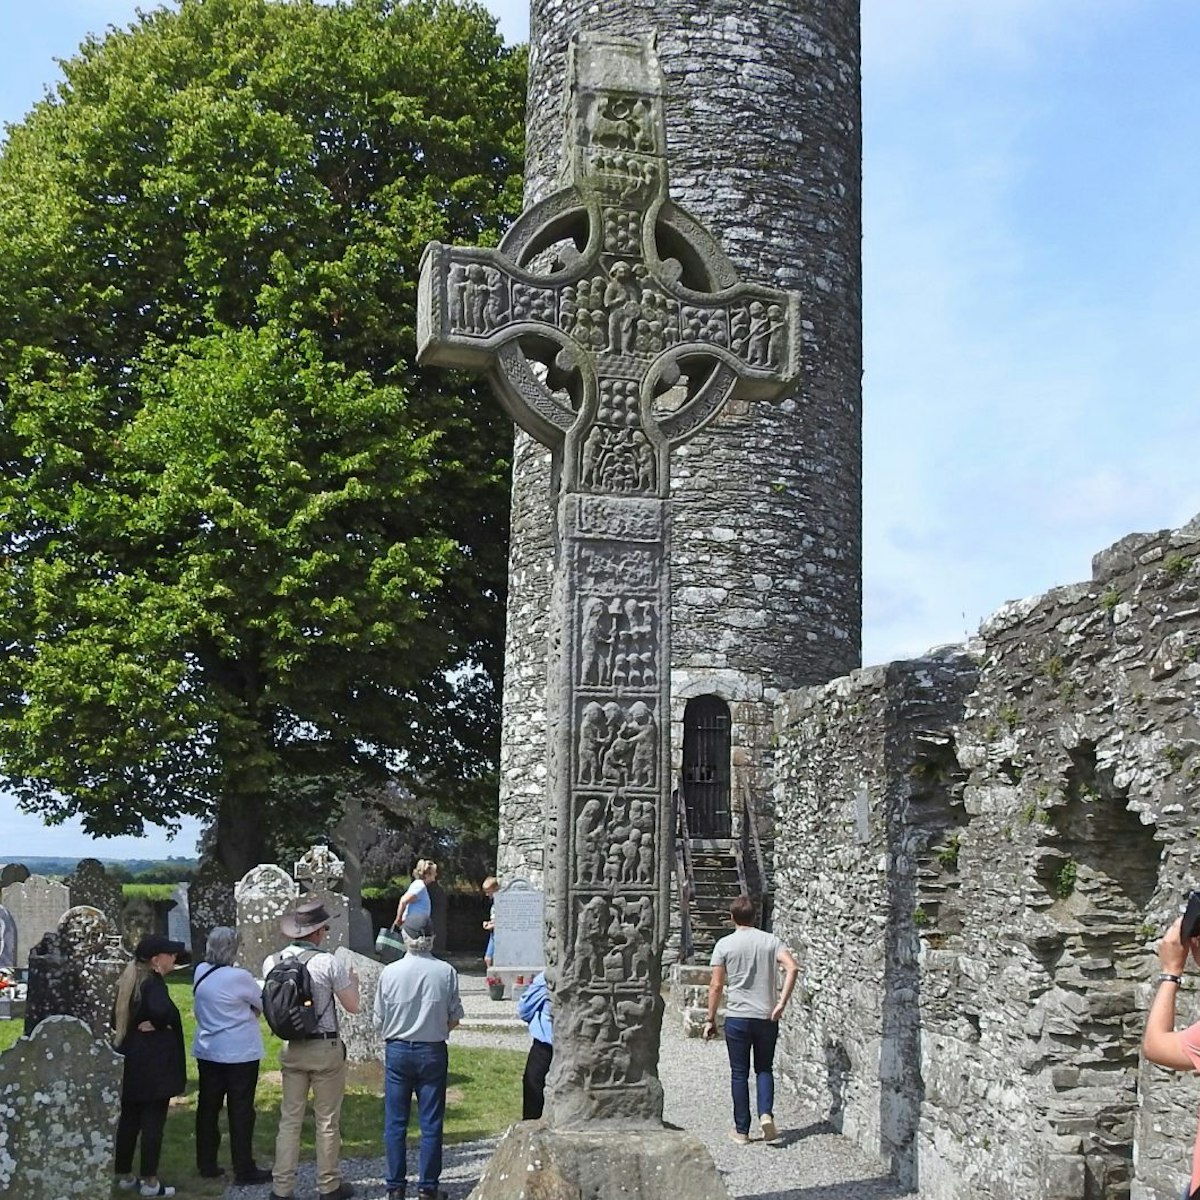 1st August 2019, Drogheda, Ireland. The historic ruins of Monasterboice, an early Christian settlement near Drogheda in County Louth, Ireland.